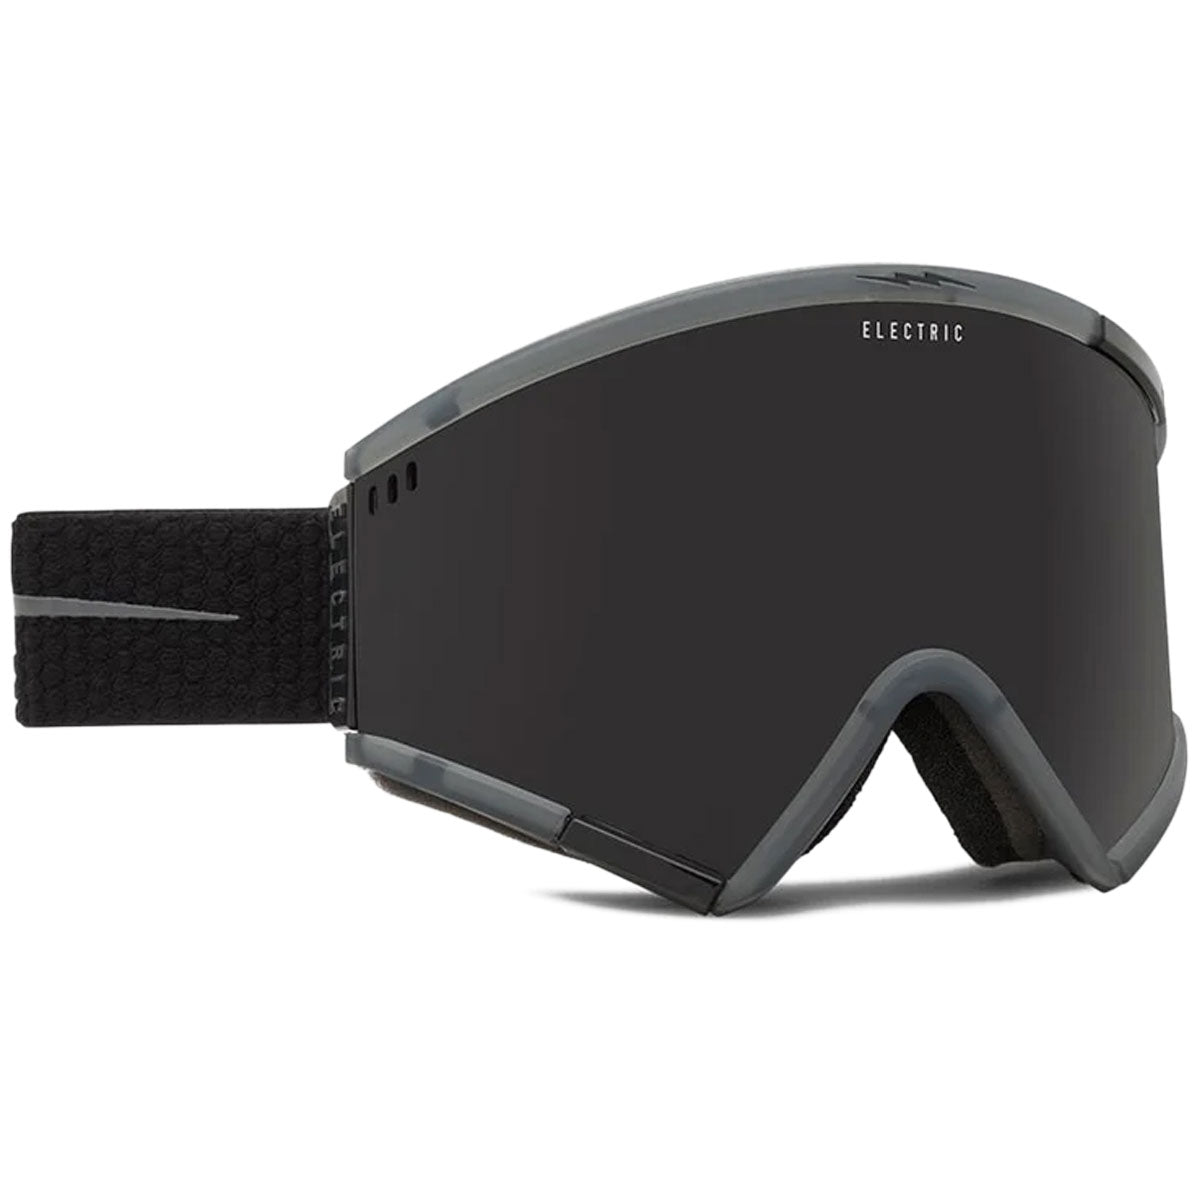 Electric Roteck Snowboard Goggles - Matte Stealth Black/Onyx image 1